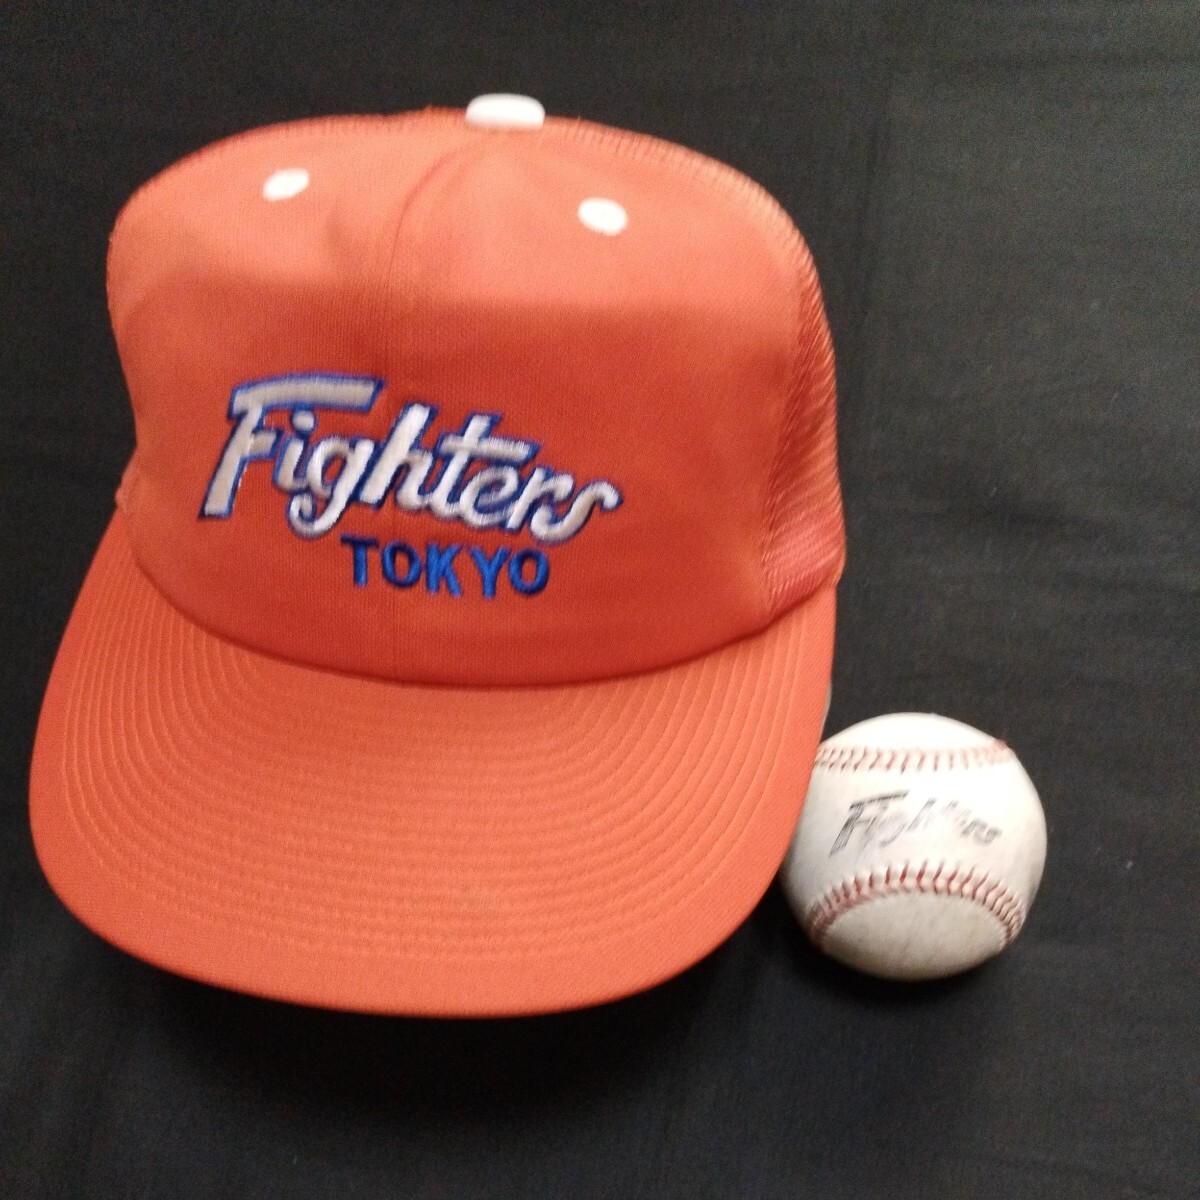  that time thing,tama The wa made Japan ham Fighter z player specification cap * practice lamp 